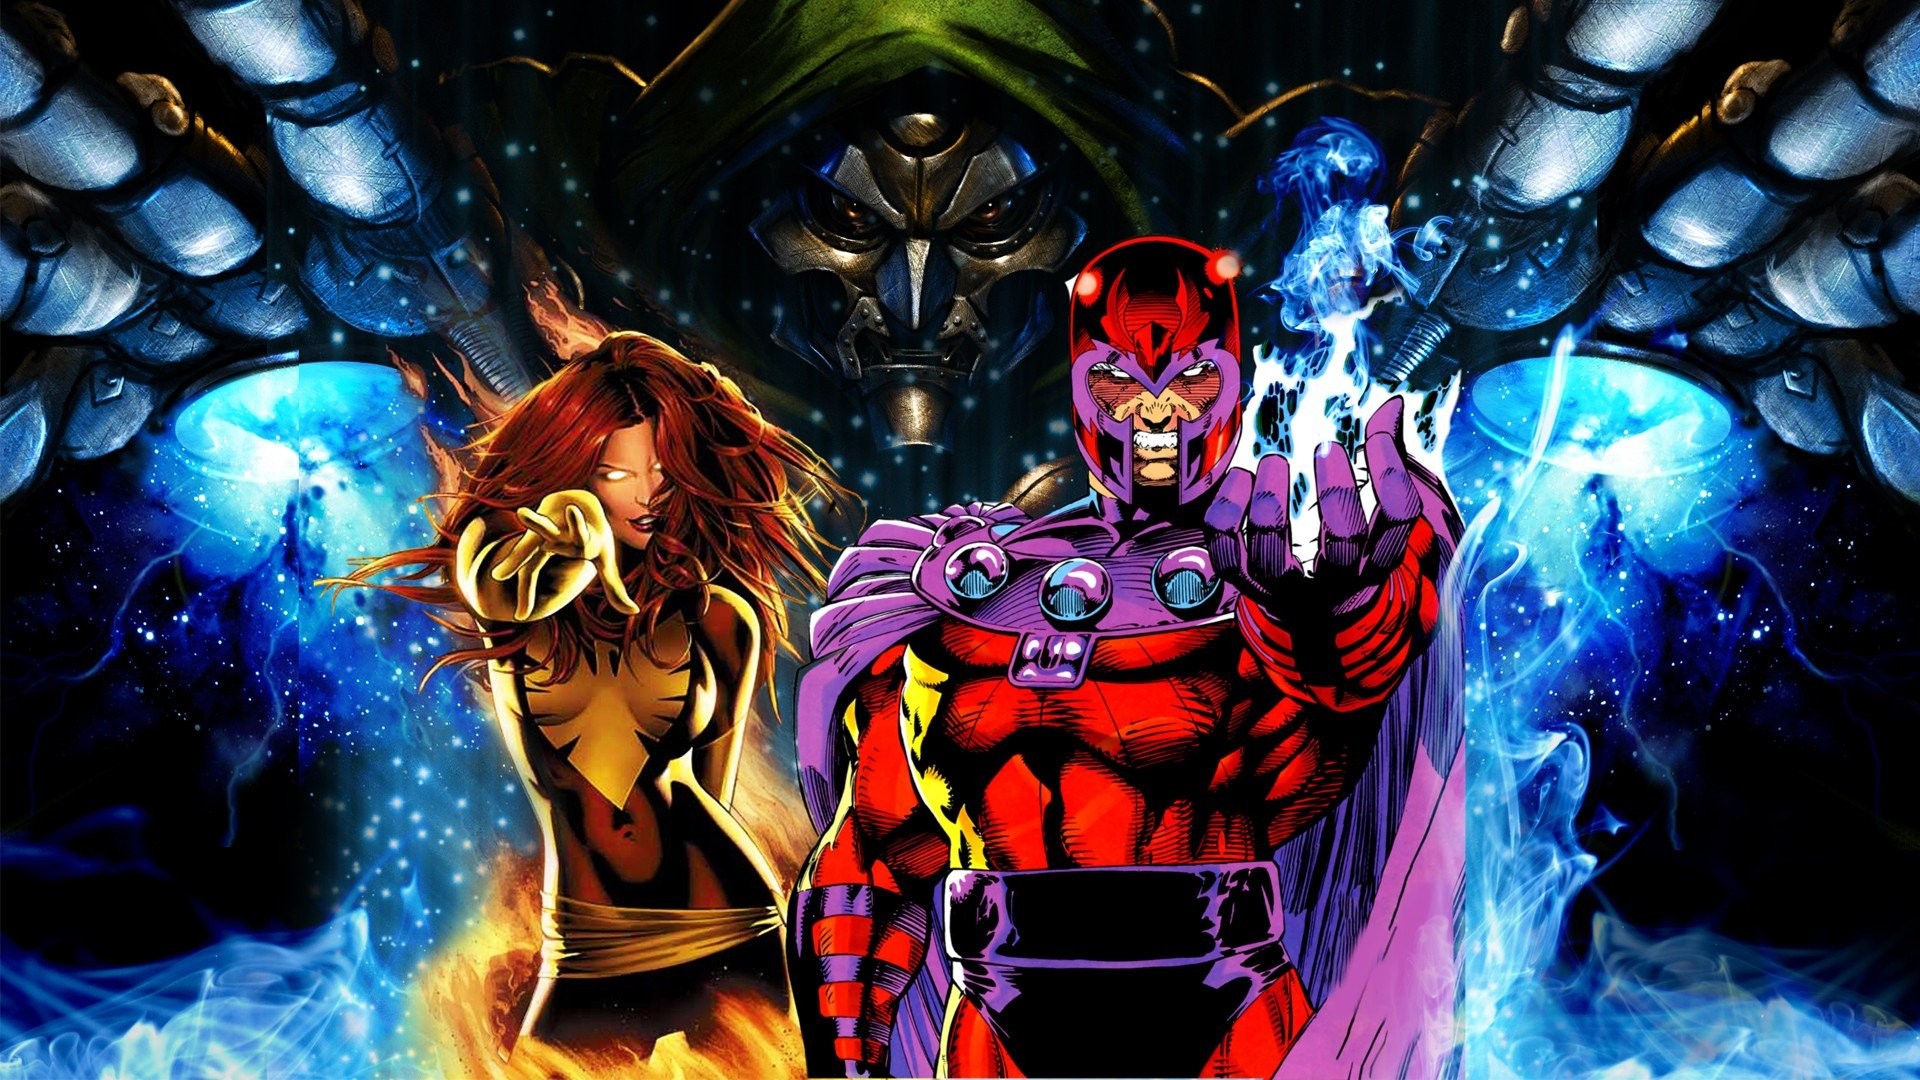 64 Magneto Hd Wallpapers Backgrounds Wallpaper Abyss 1920x1080